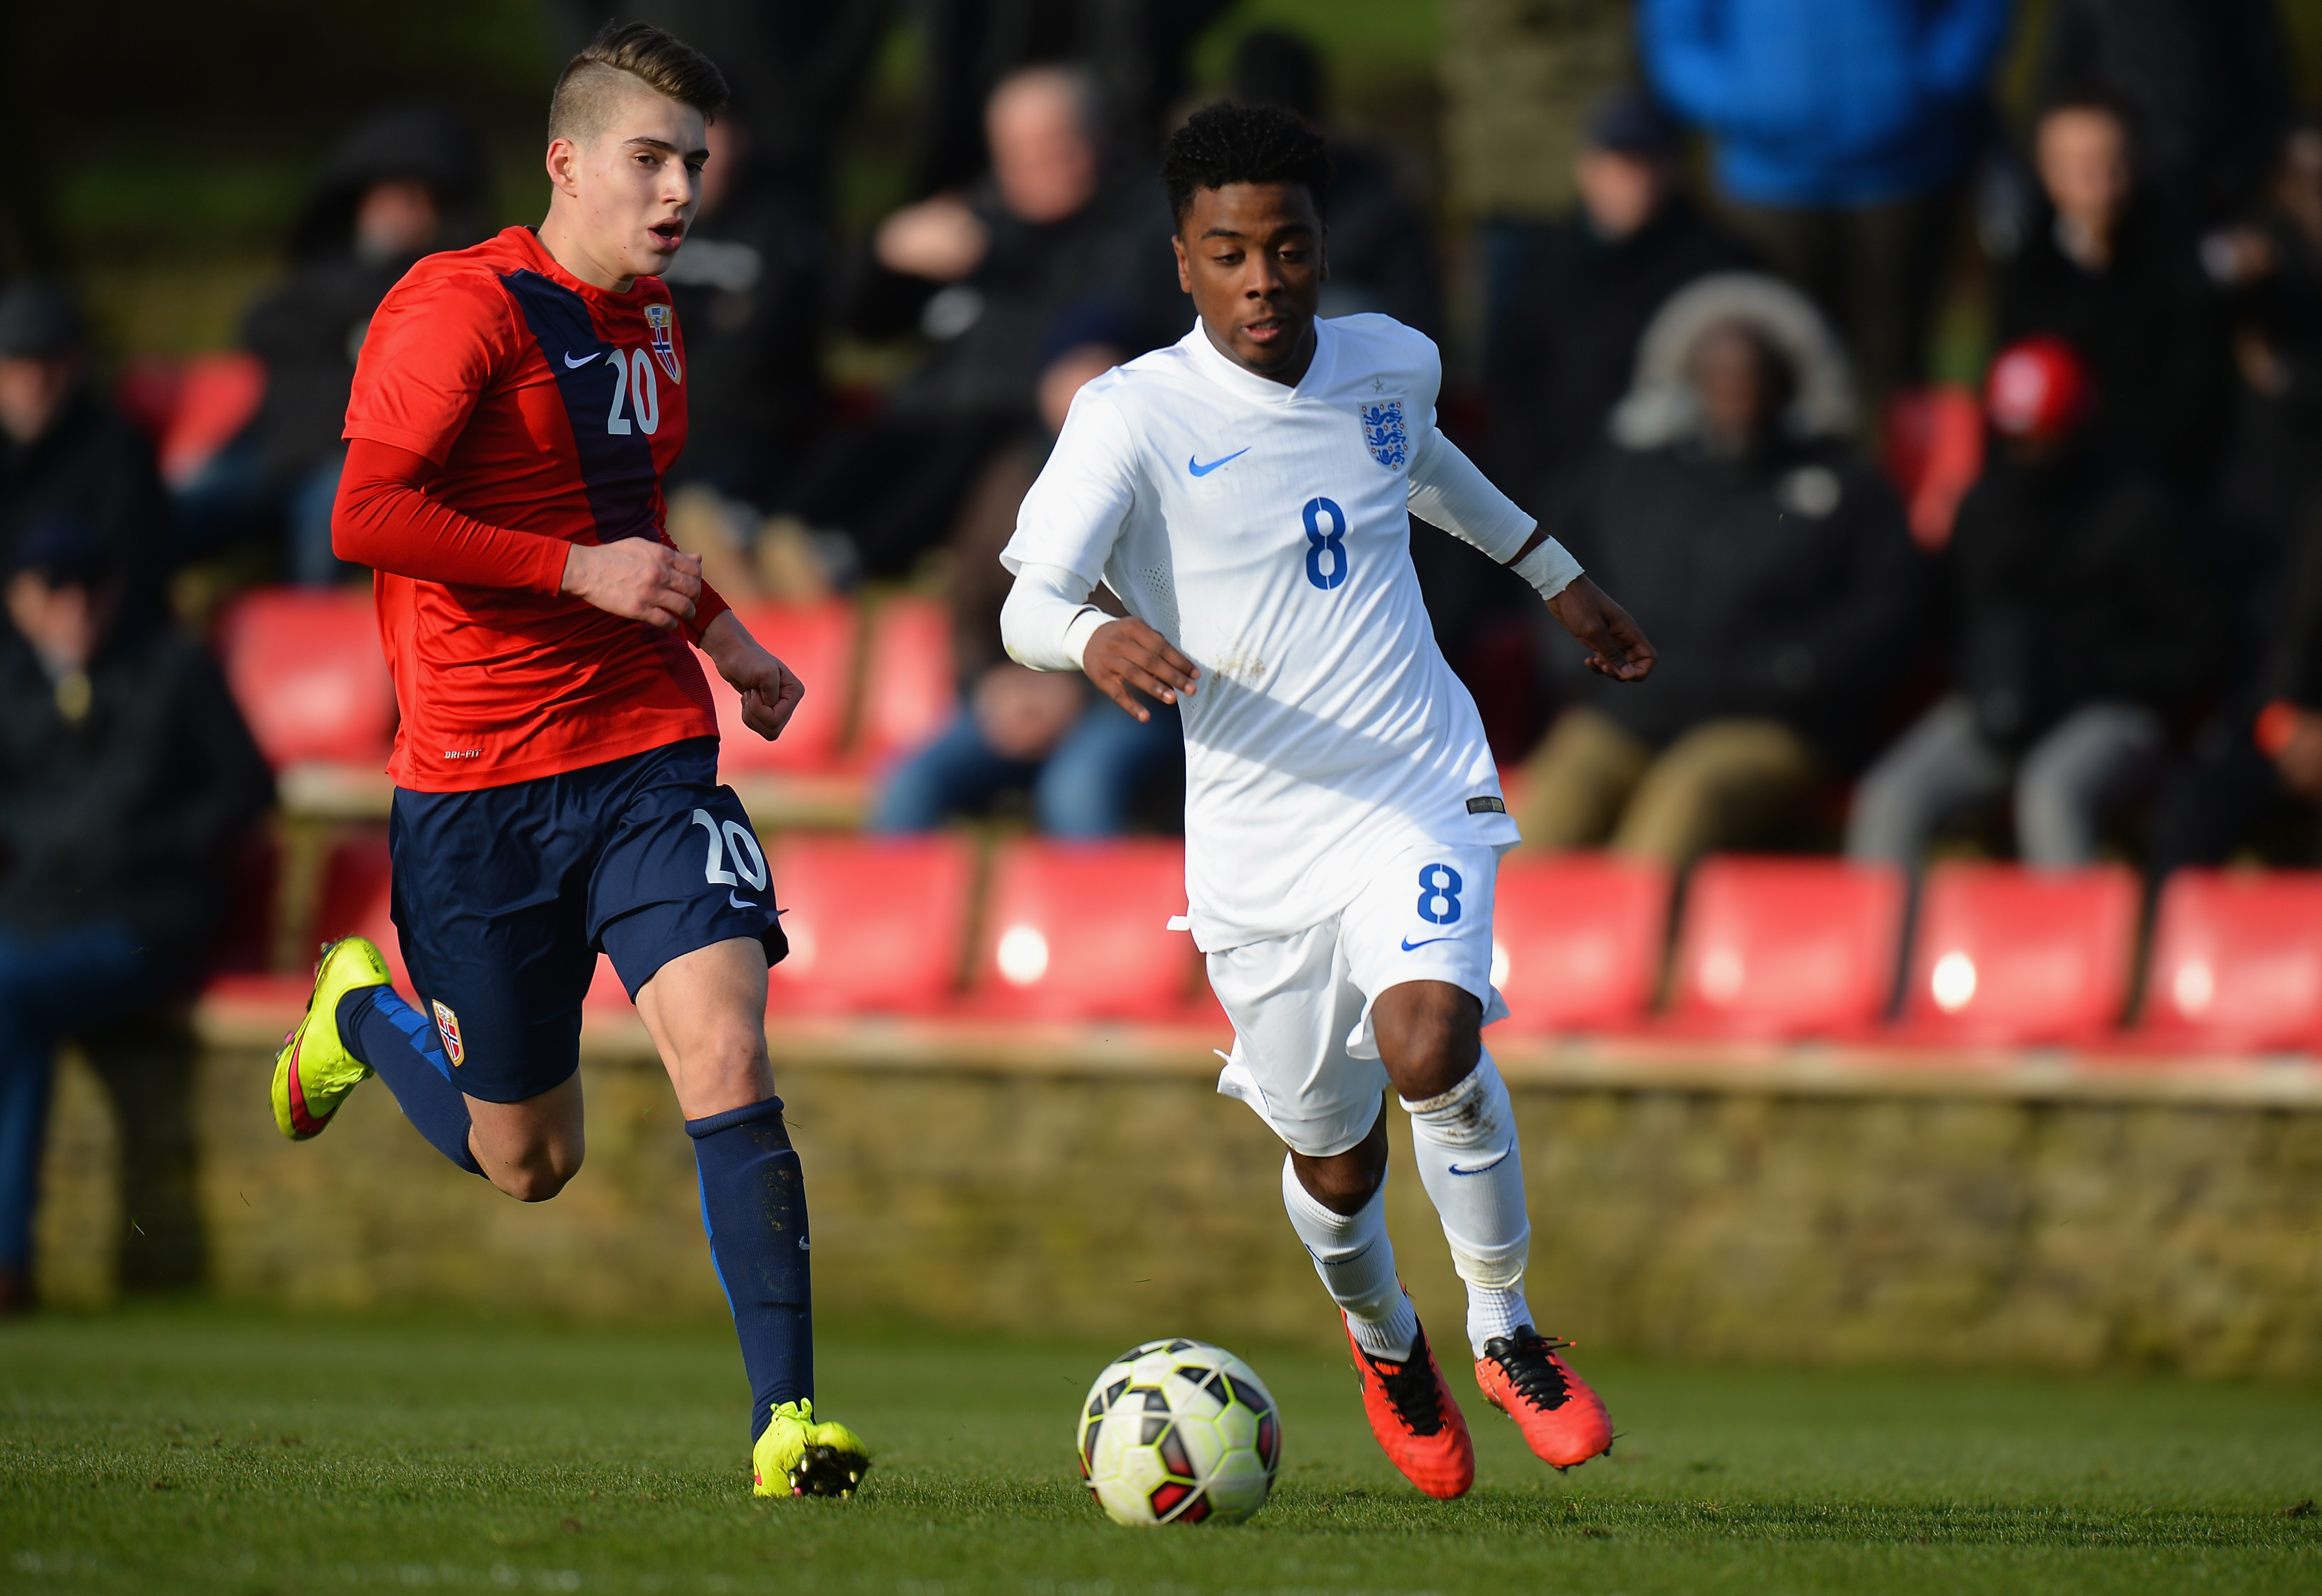 BURTON-UPON-TRENT, ENGLAND - FEBRUARY 16:  Angel Gomes of England U16 pushes forward during the U16s International Friendly match between England U16 and Norway U16 at St Georges Park on February 16, 2016 in Burton-upon-Trent, England.  (Photo by Tony Marshall/Getty Images)